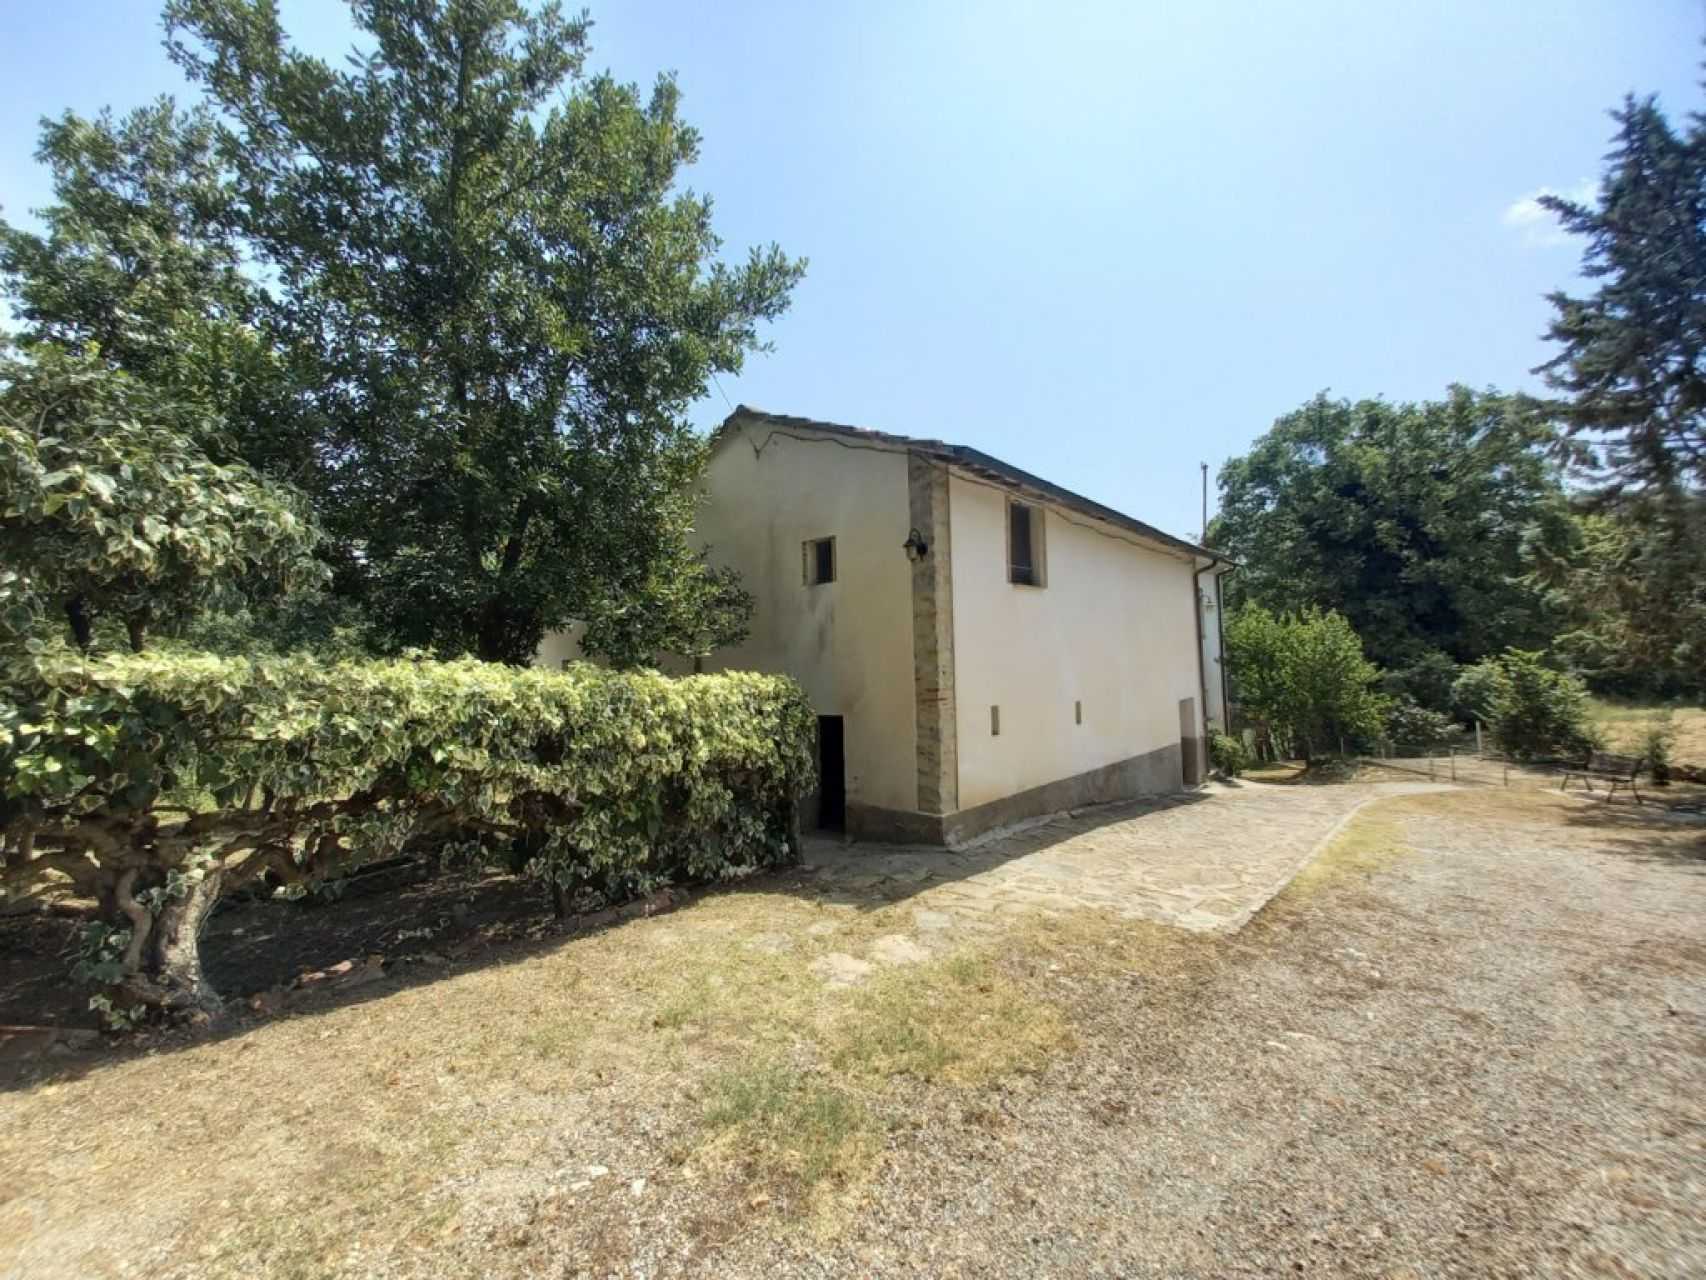 Detached house in the open countrysideg_202307261531402317 ium36909-g_202307261531402317.